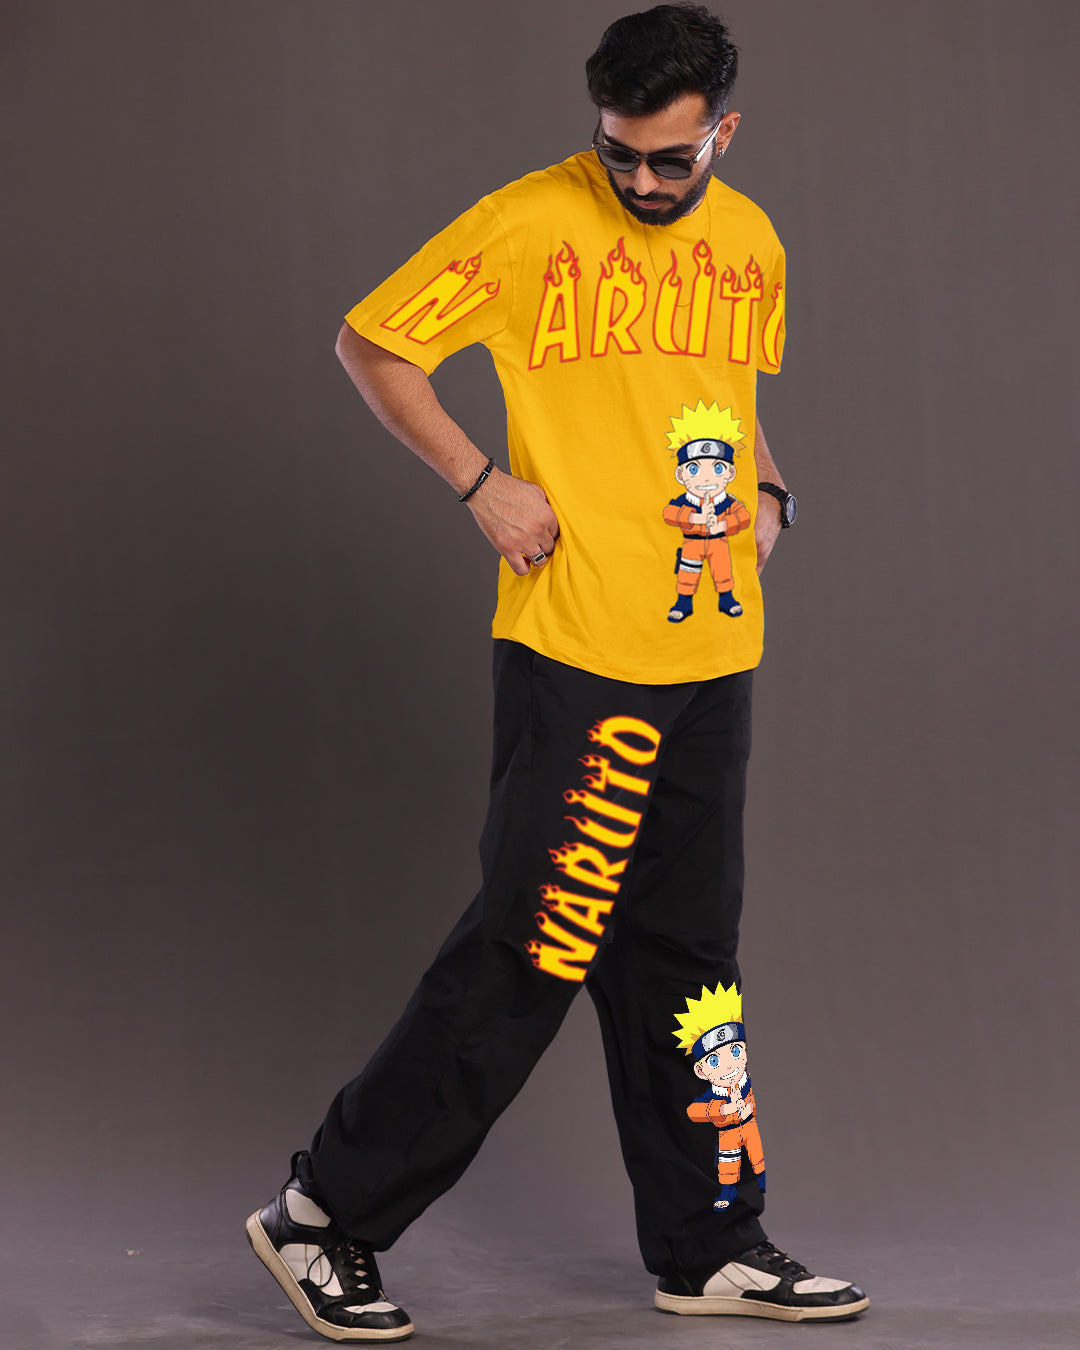 Men's Naruto Fire Oversized Co-Ord Set - Yellow and Black